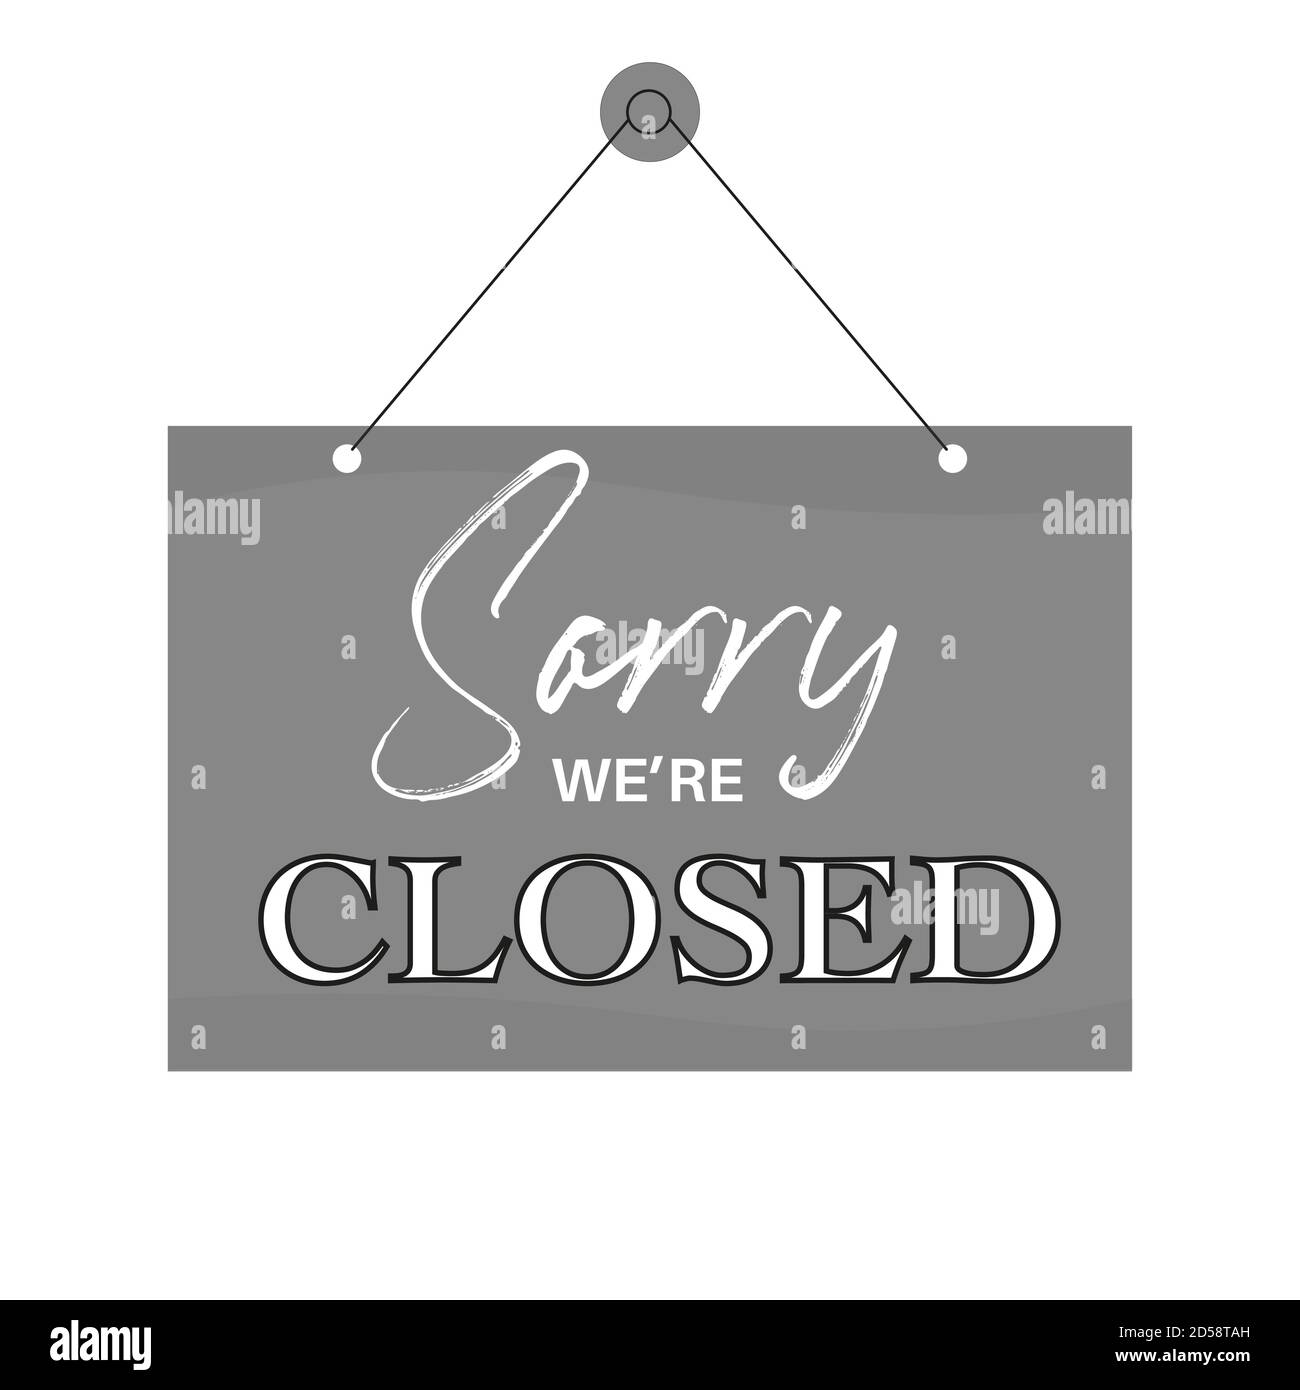 Sorry we are closed shop sign vector Stock Vector